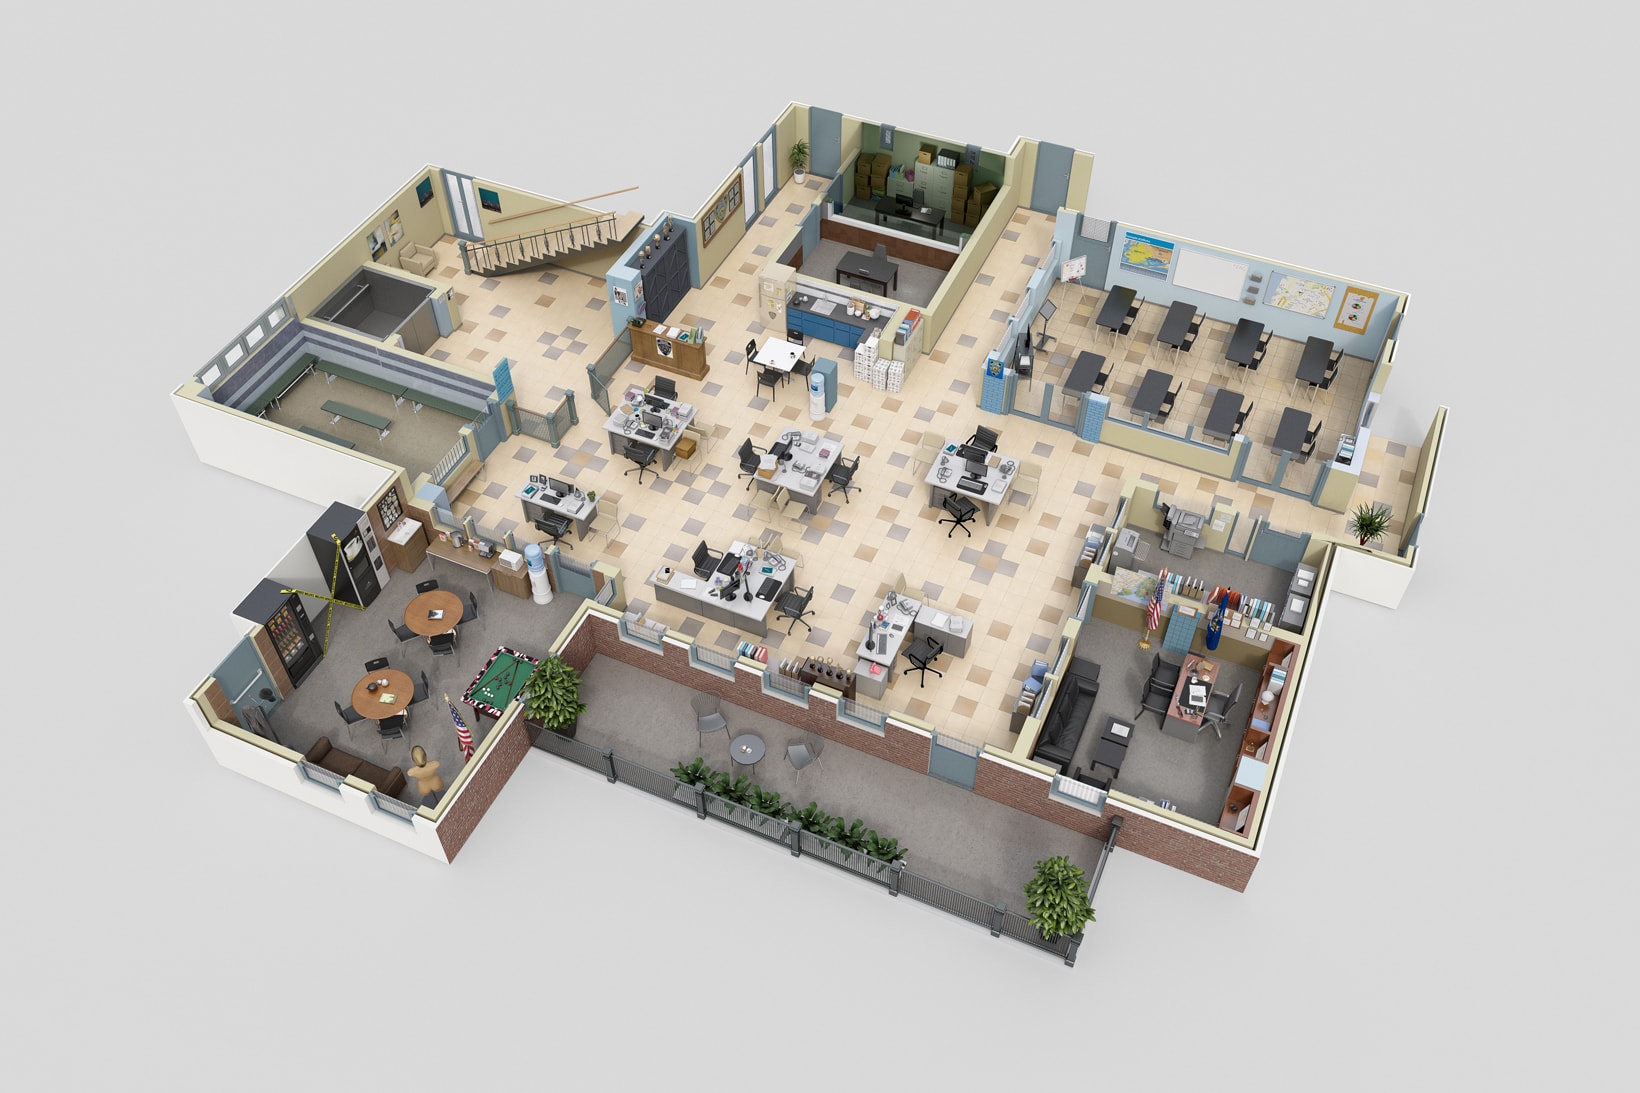 Drawbotics 3D Floor Plans The Office Mad Men Silicon Valley Parks and Rec